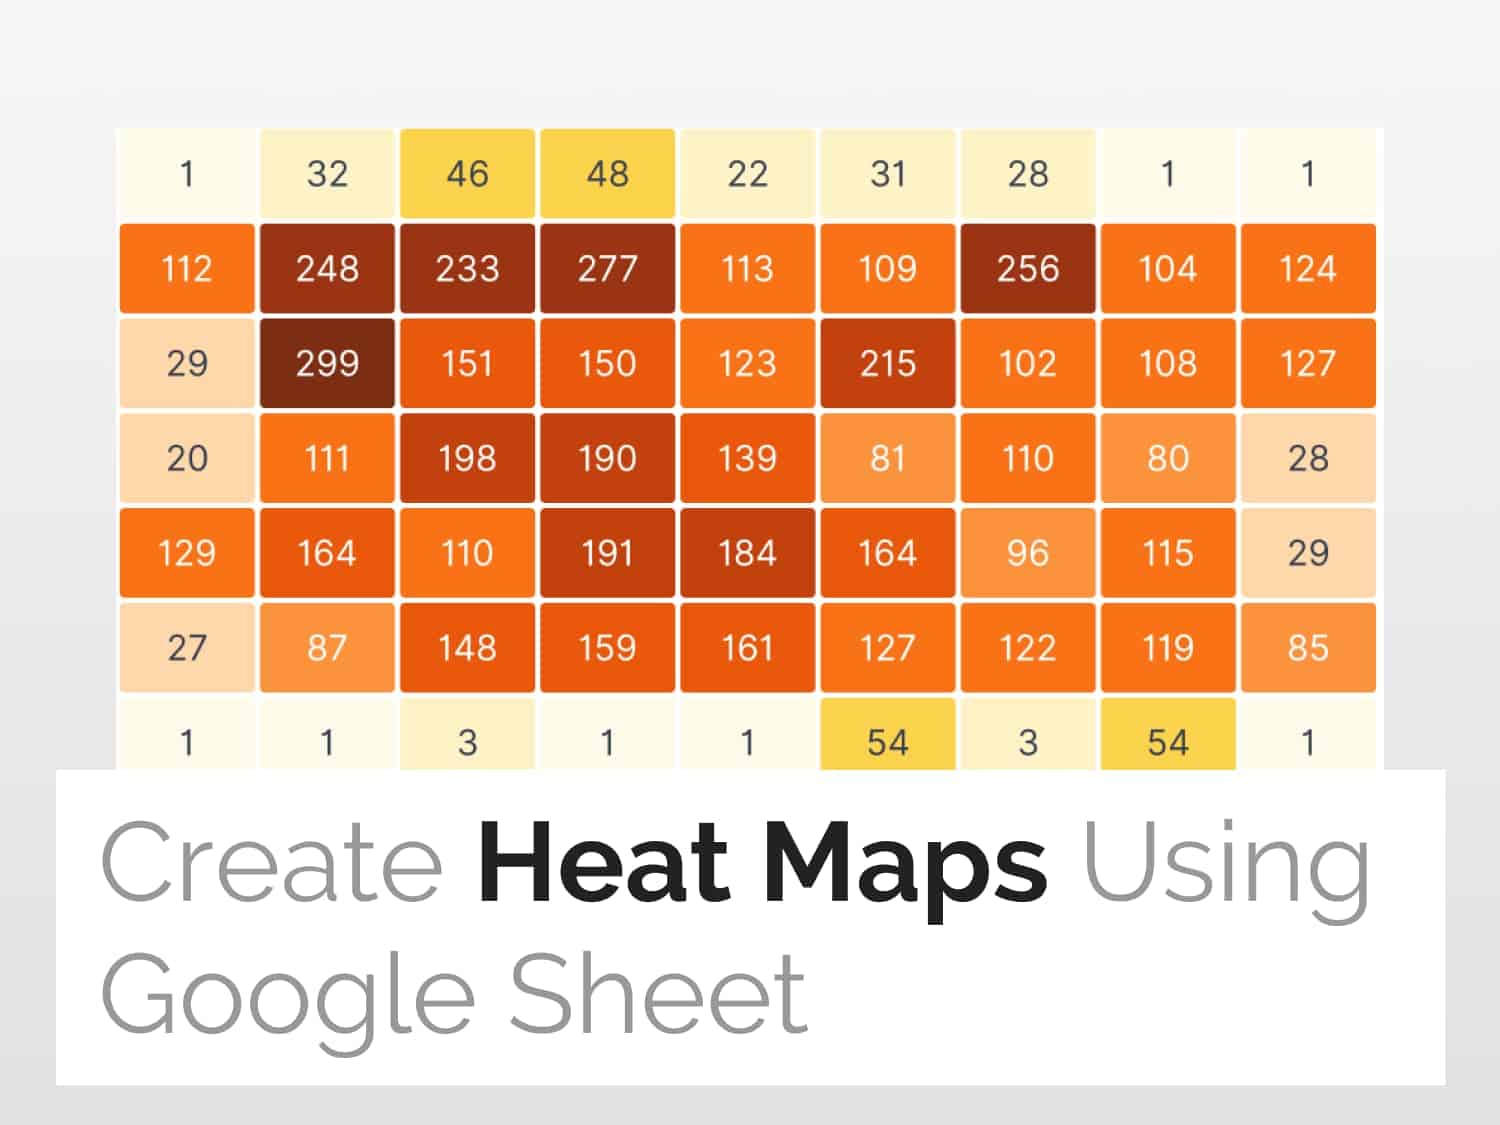 How to create Heat Maps in Google Sheets